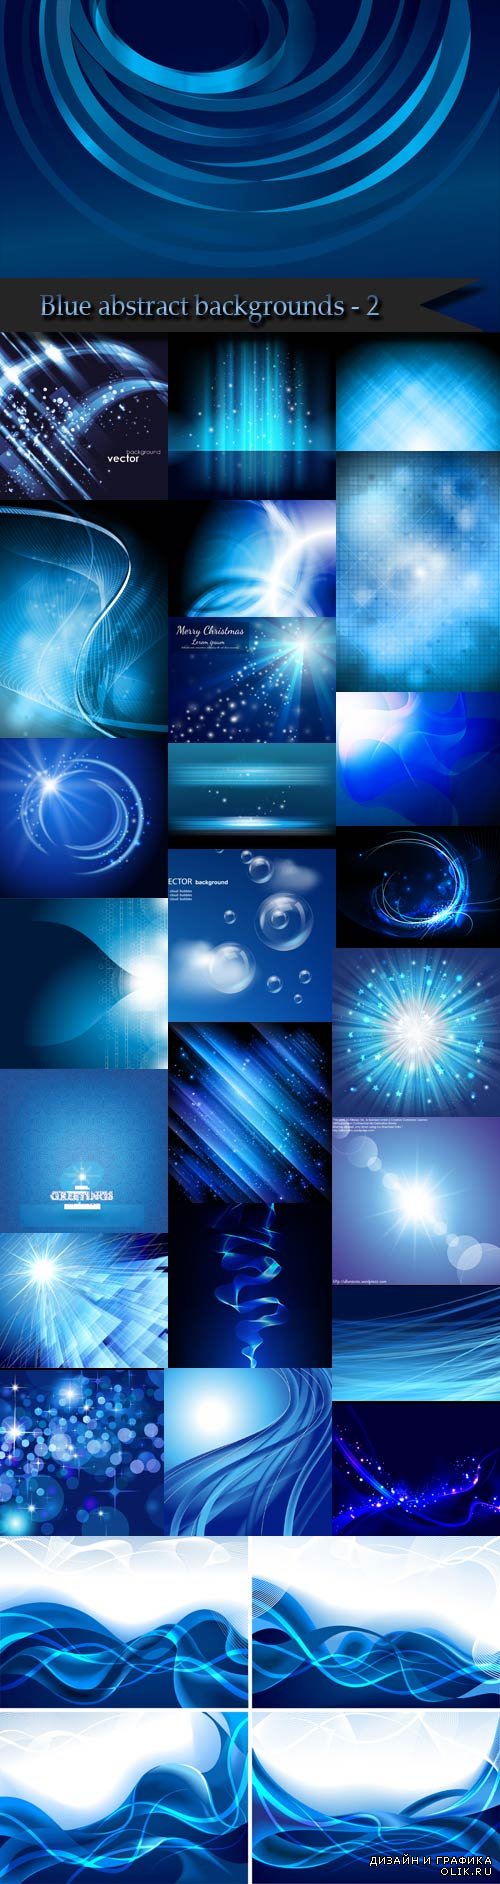 Blue abstract backgrounds - 2